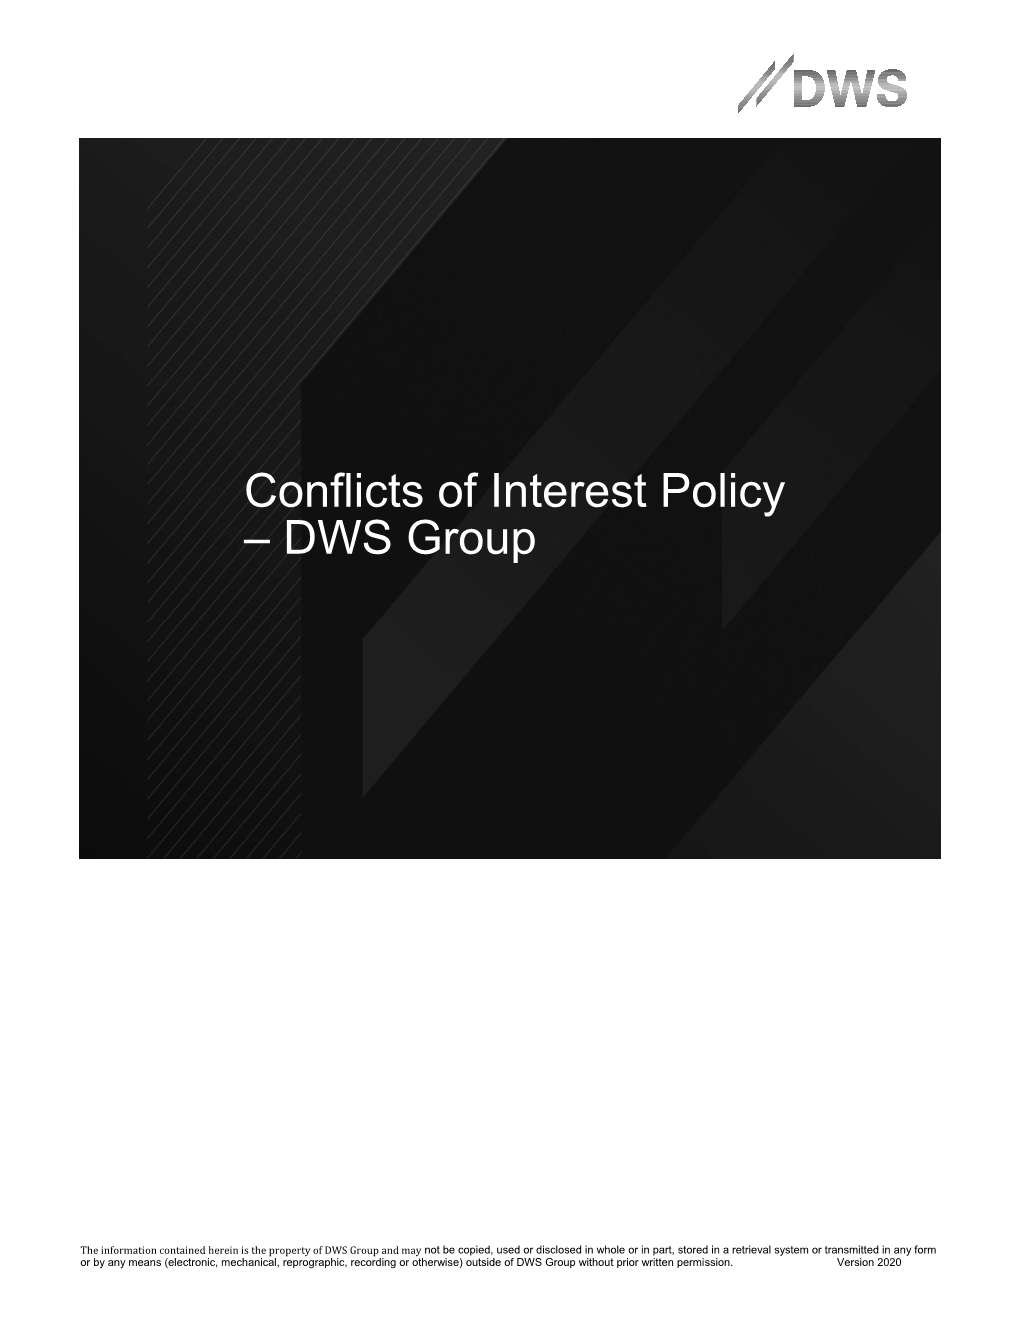 Conflicts of Interest Policy – DWS Group